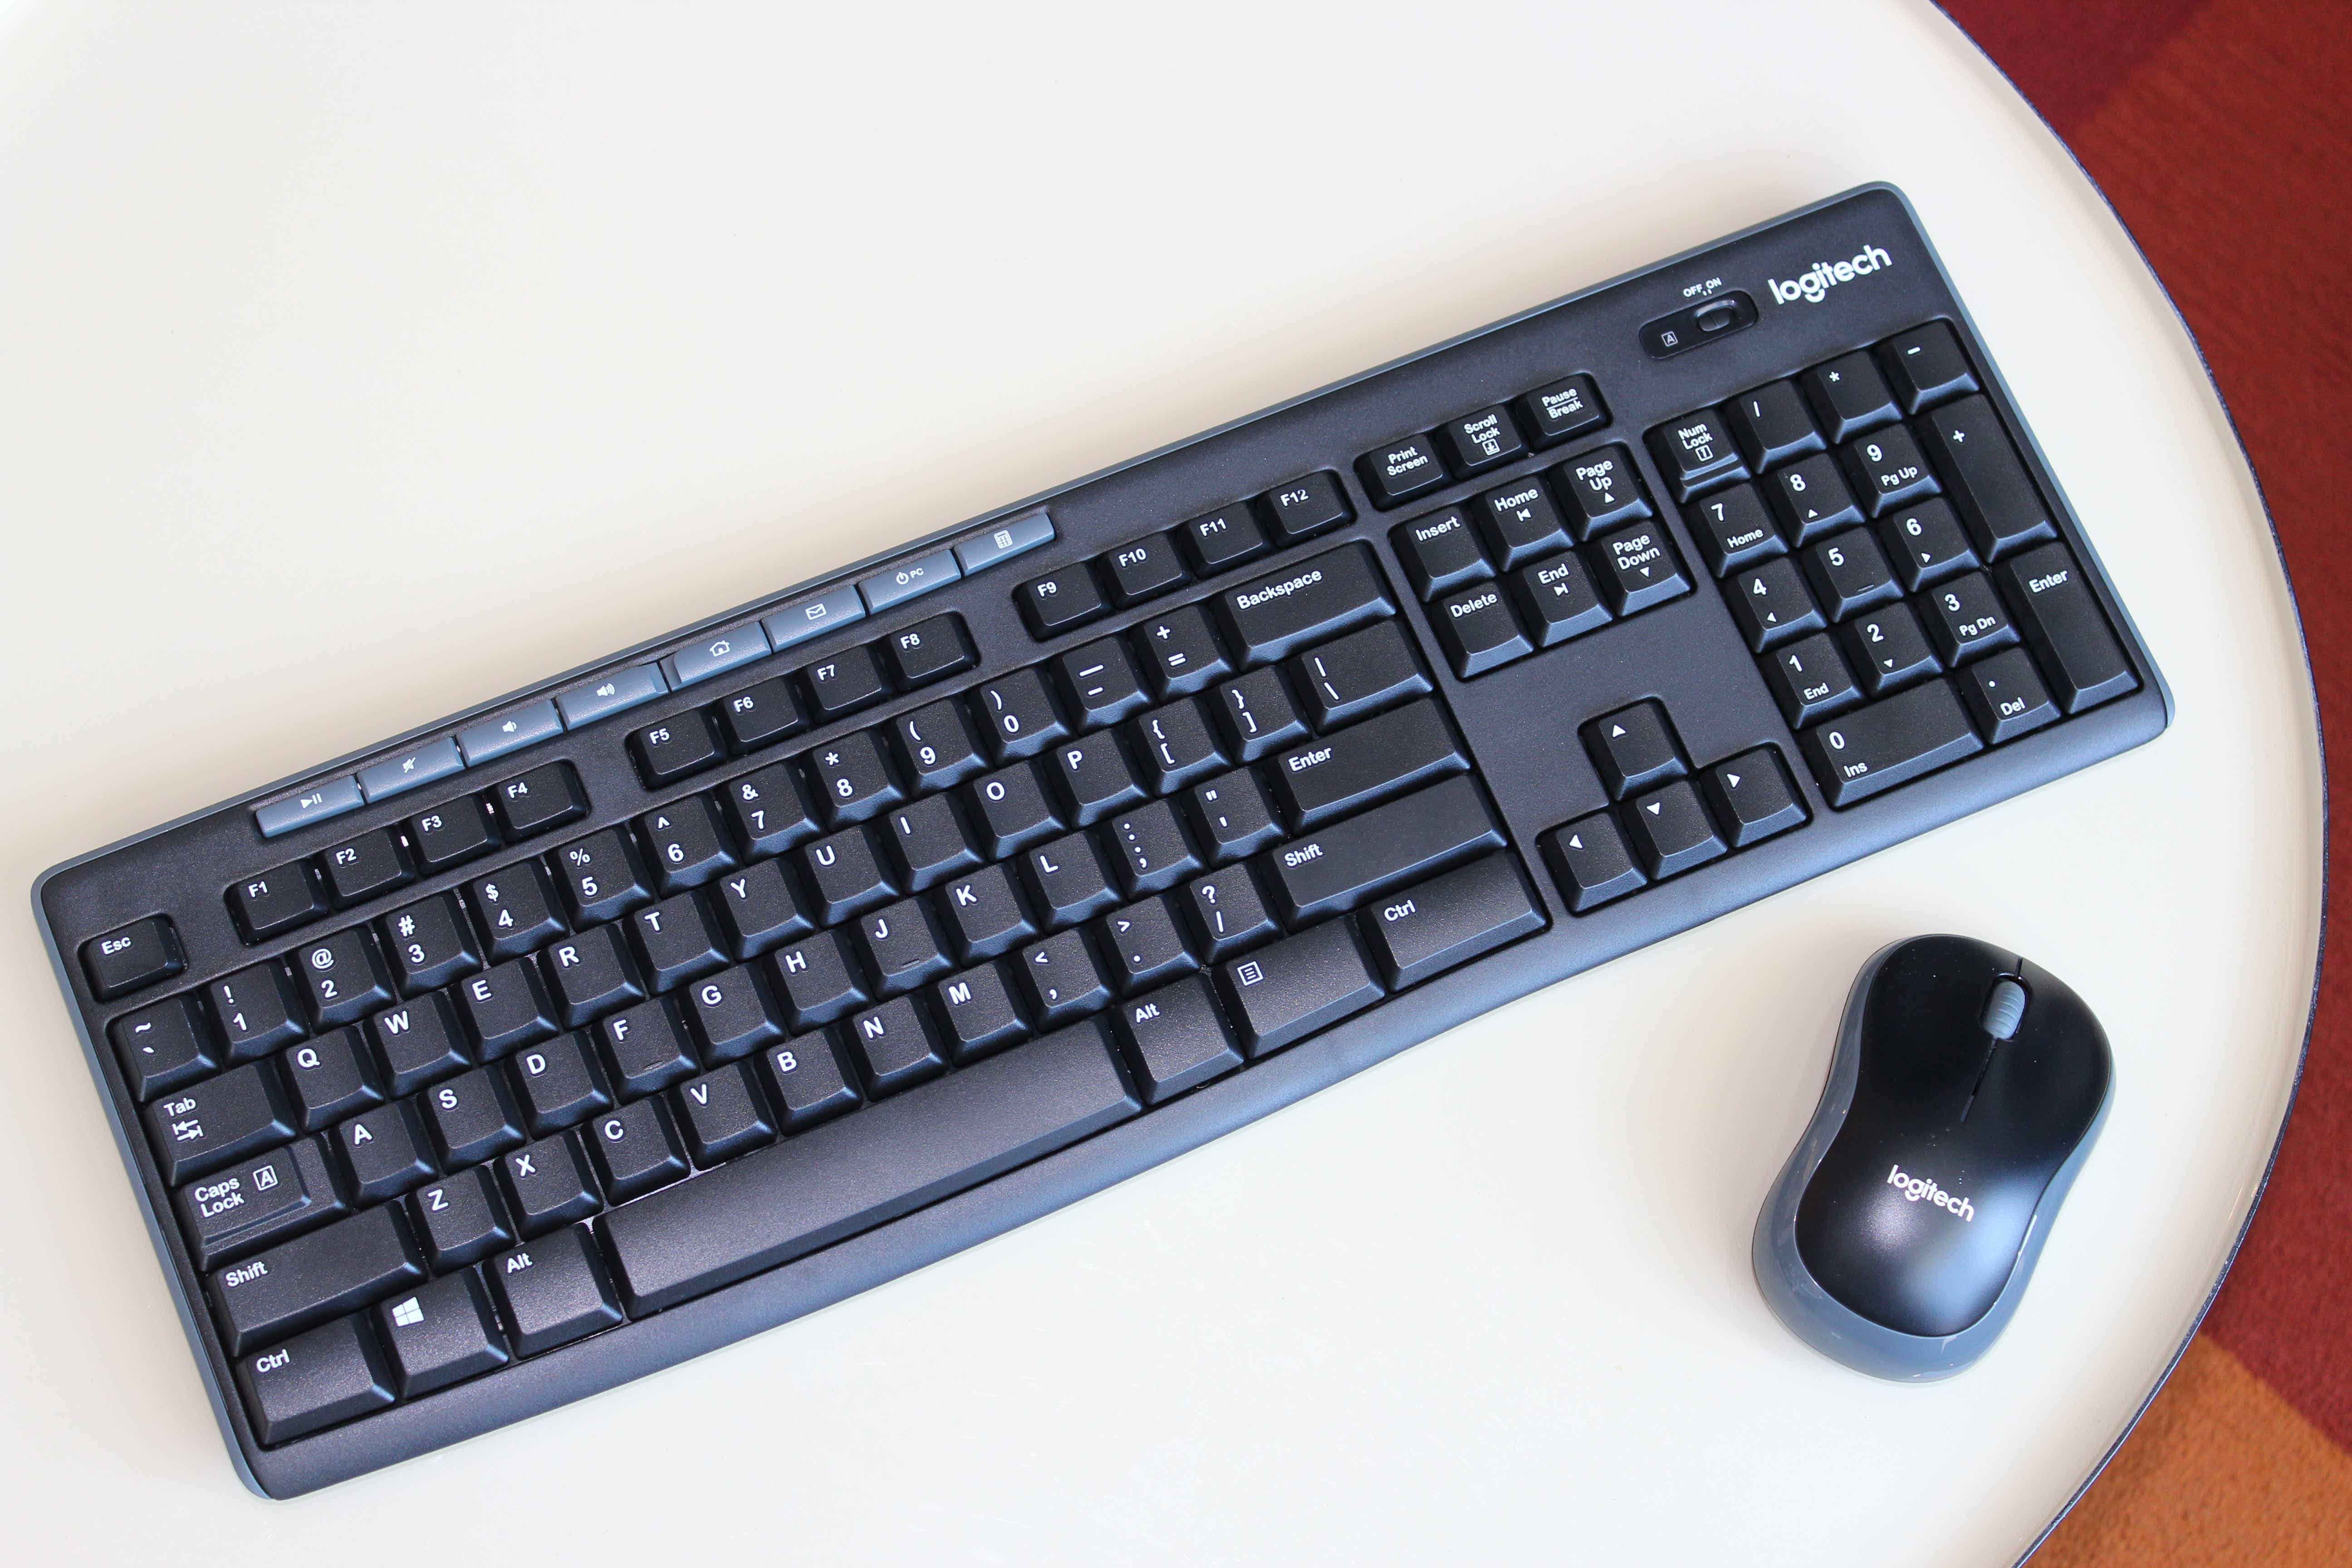 MK270 wireless keyboard and mouse